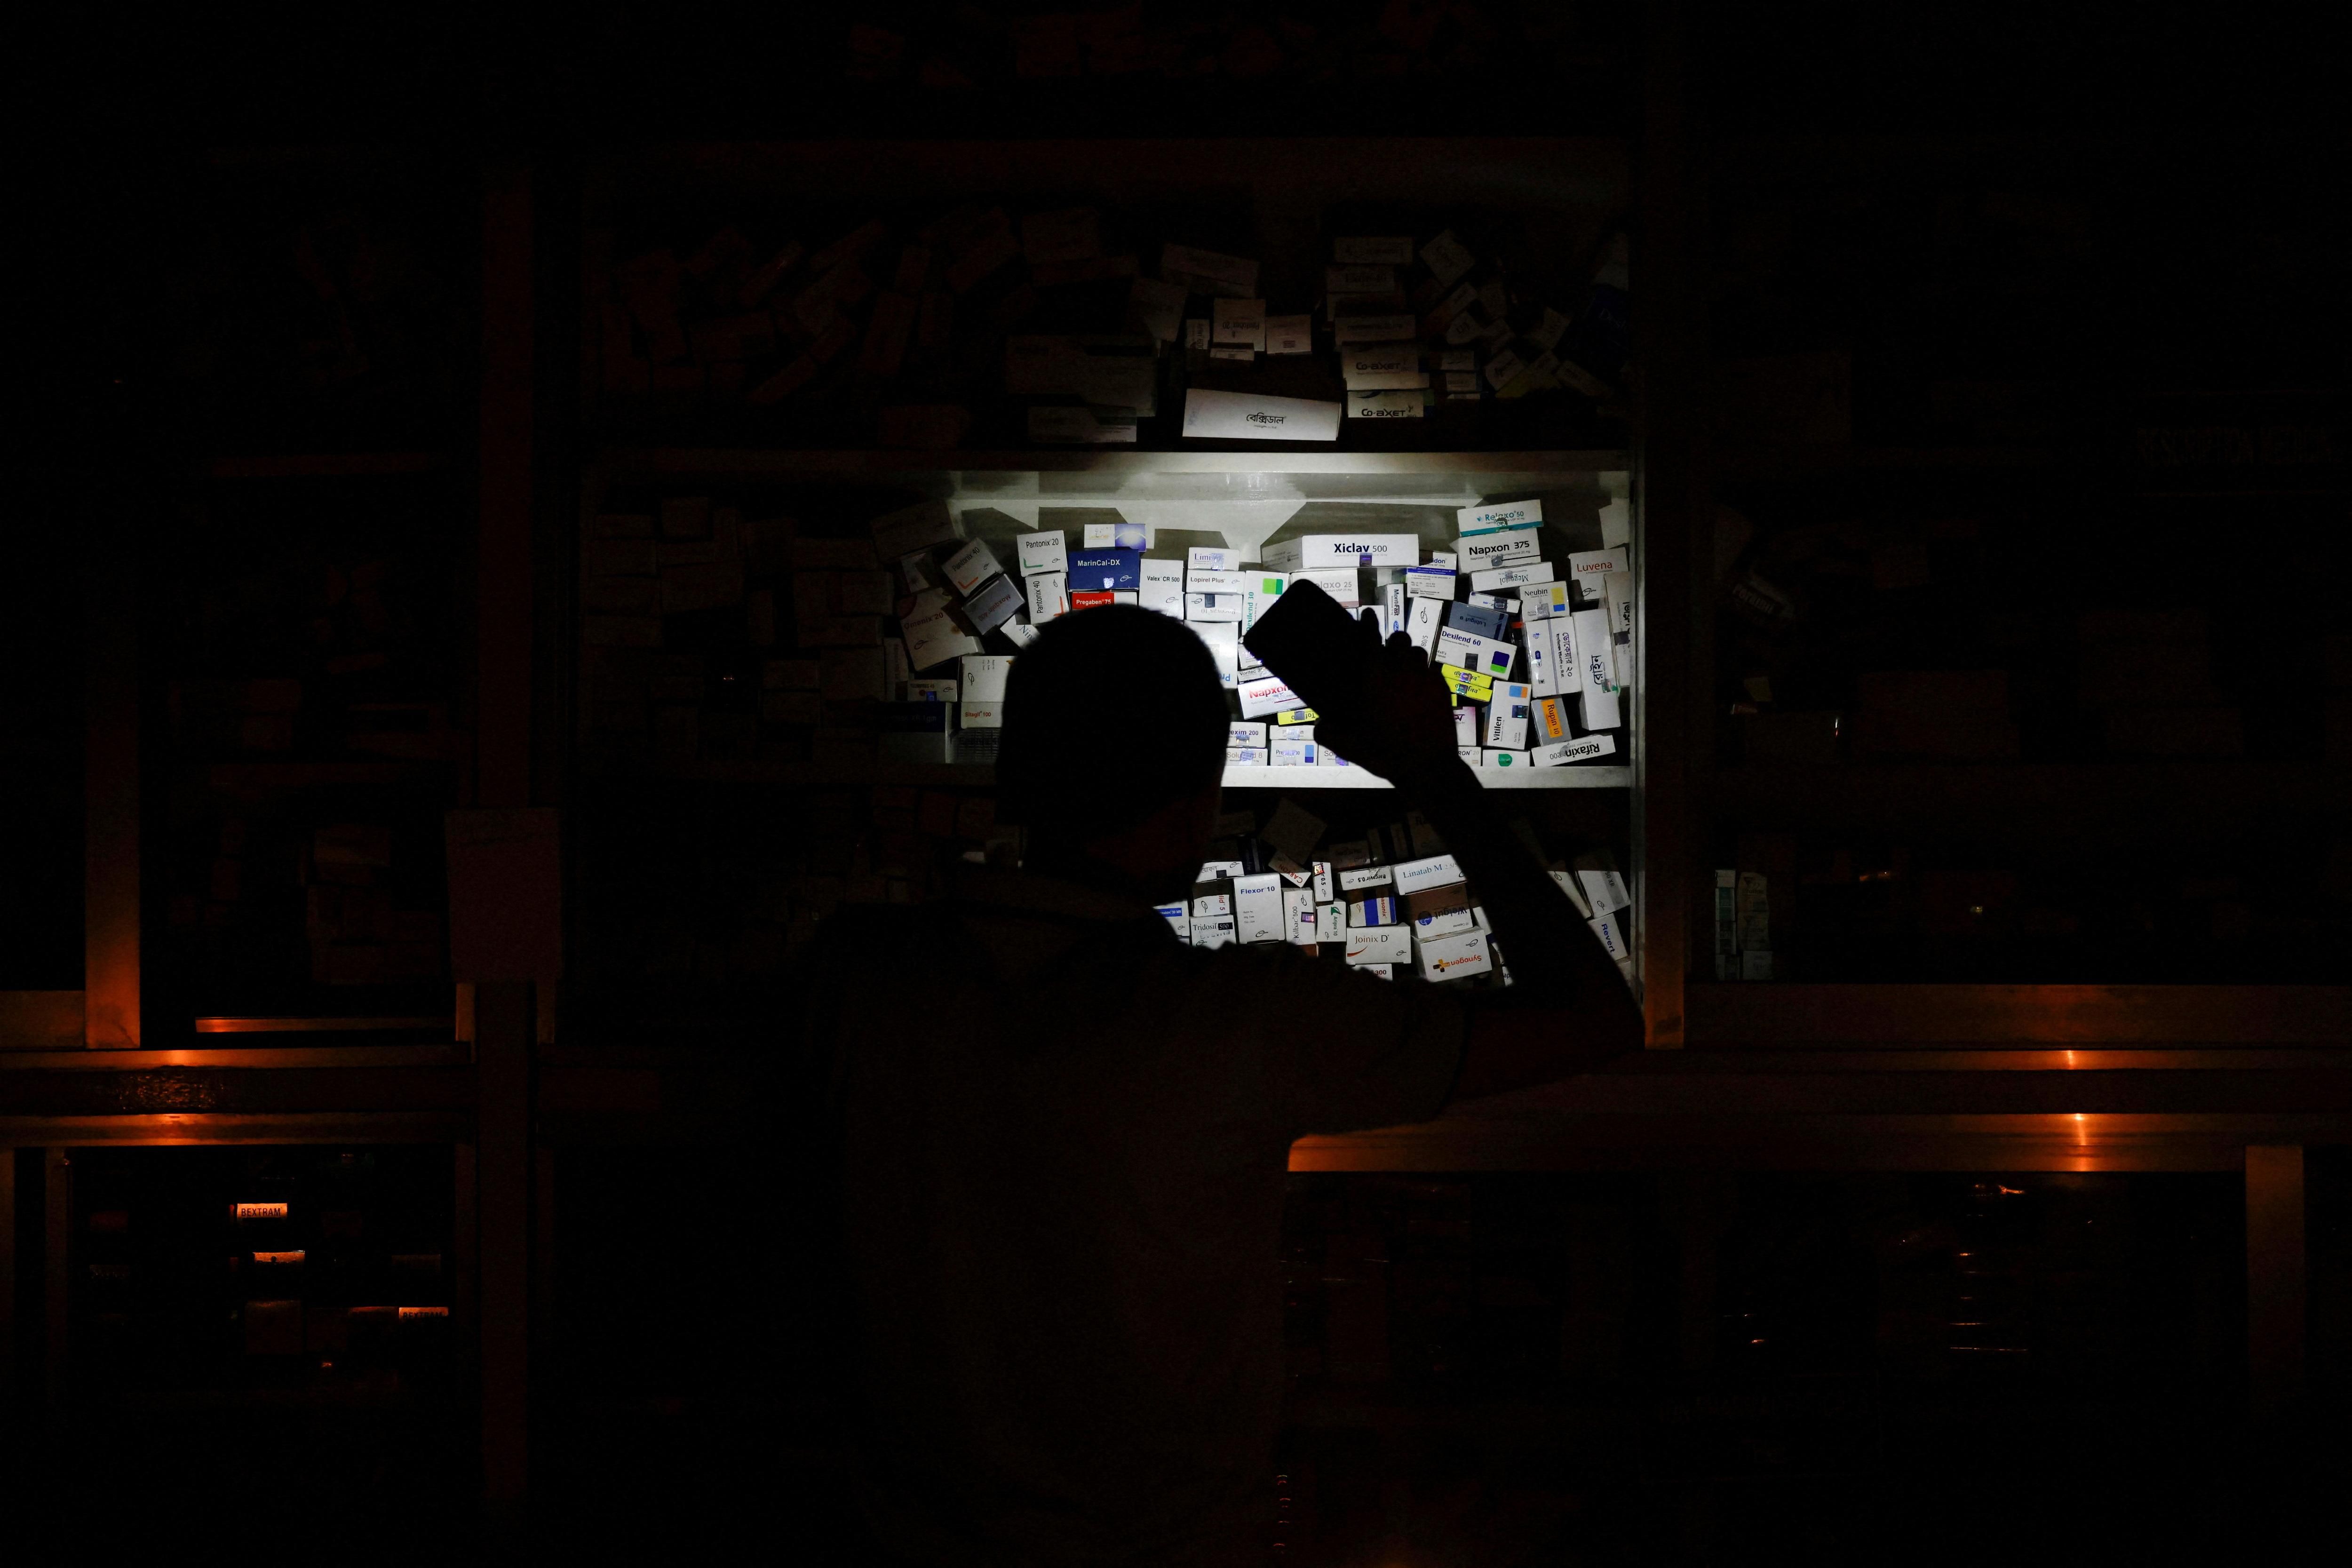 A pharmacist uses his phone light to serve customers during a nationwide blackout in Dhaka.